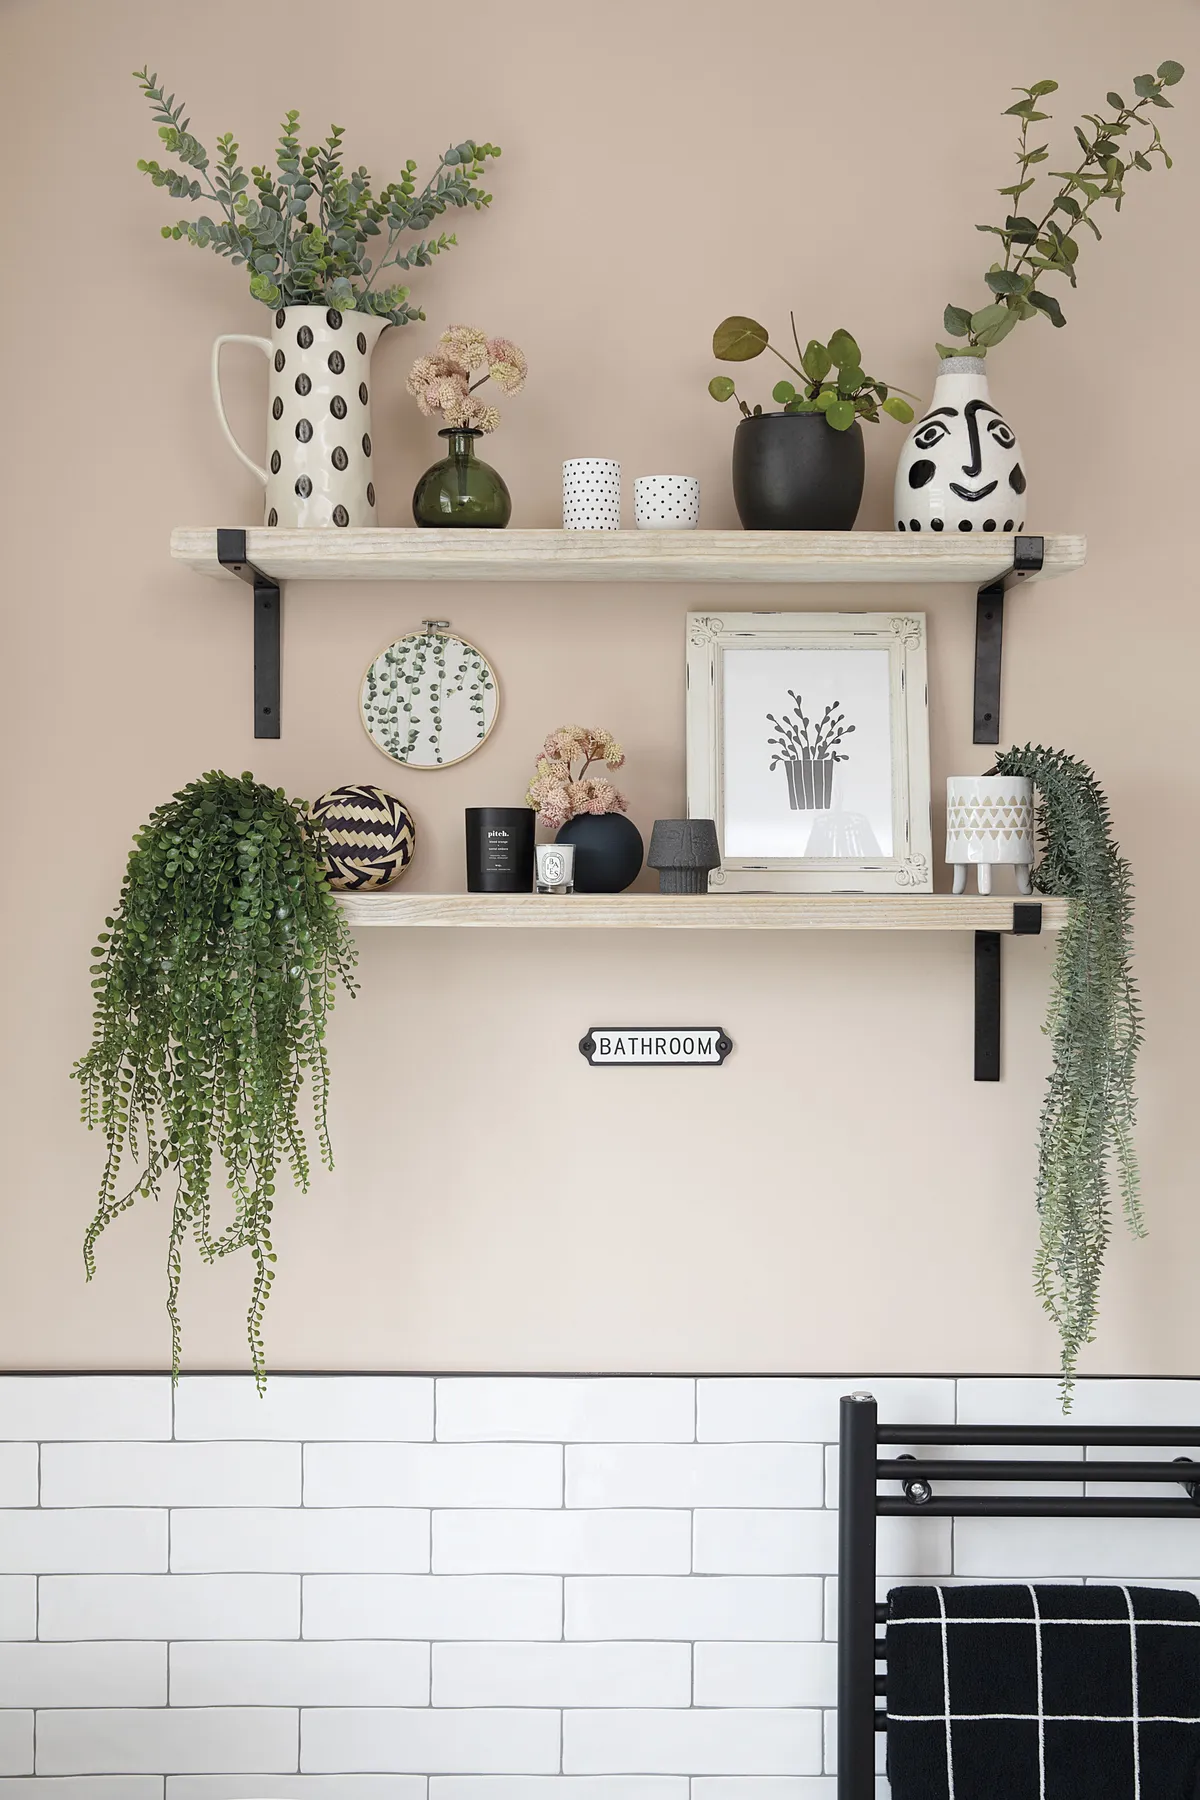 Stylist Liz loves spending time rearranging her shelves with different vases, plants and prints to keep the scheme looking fresh